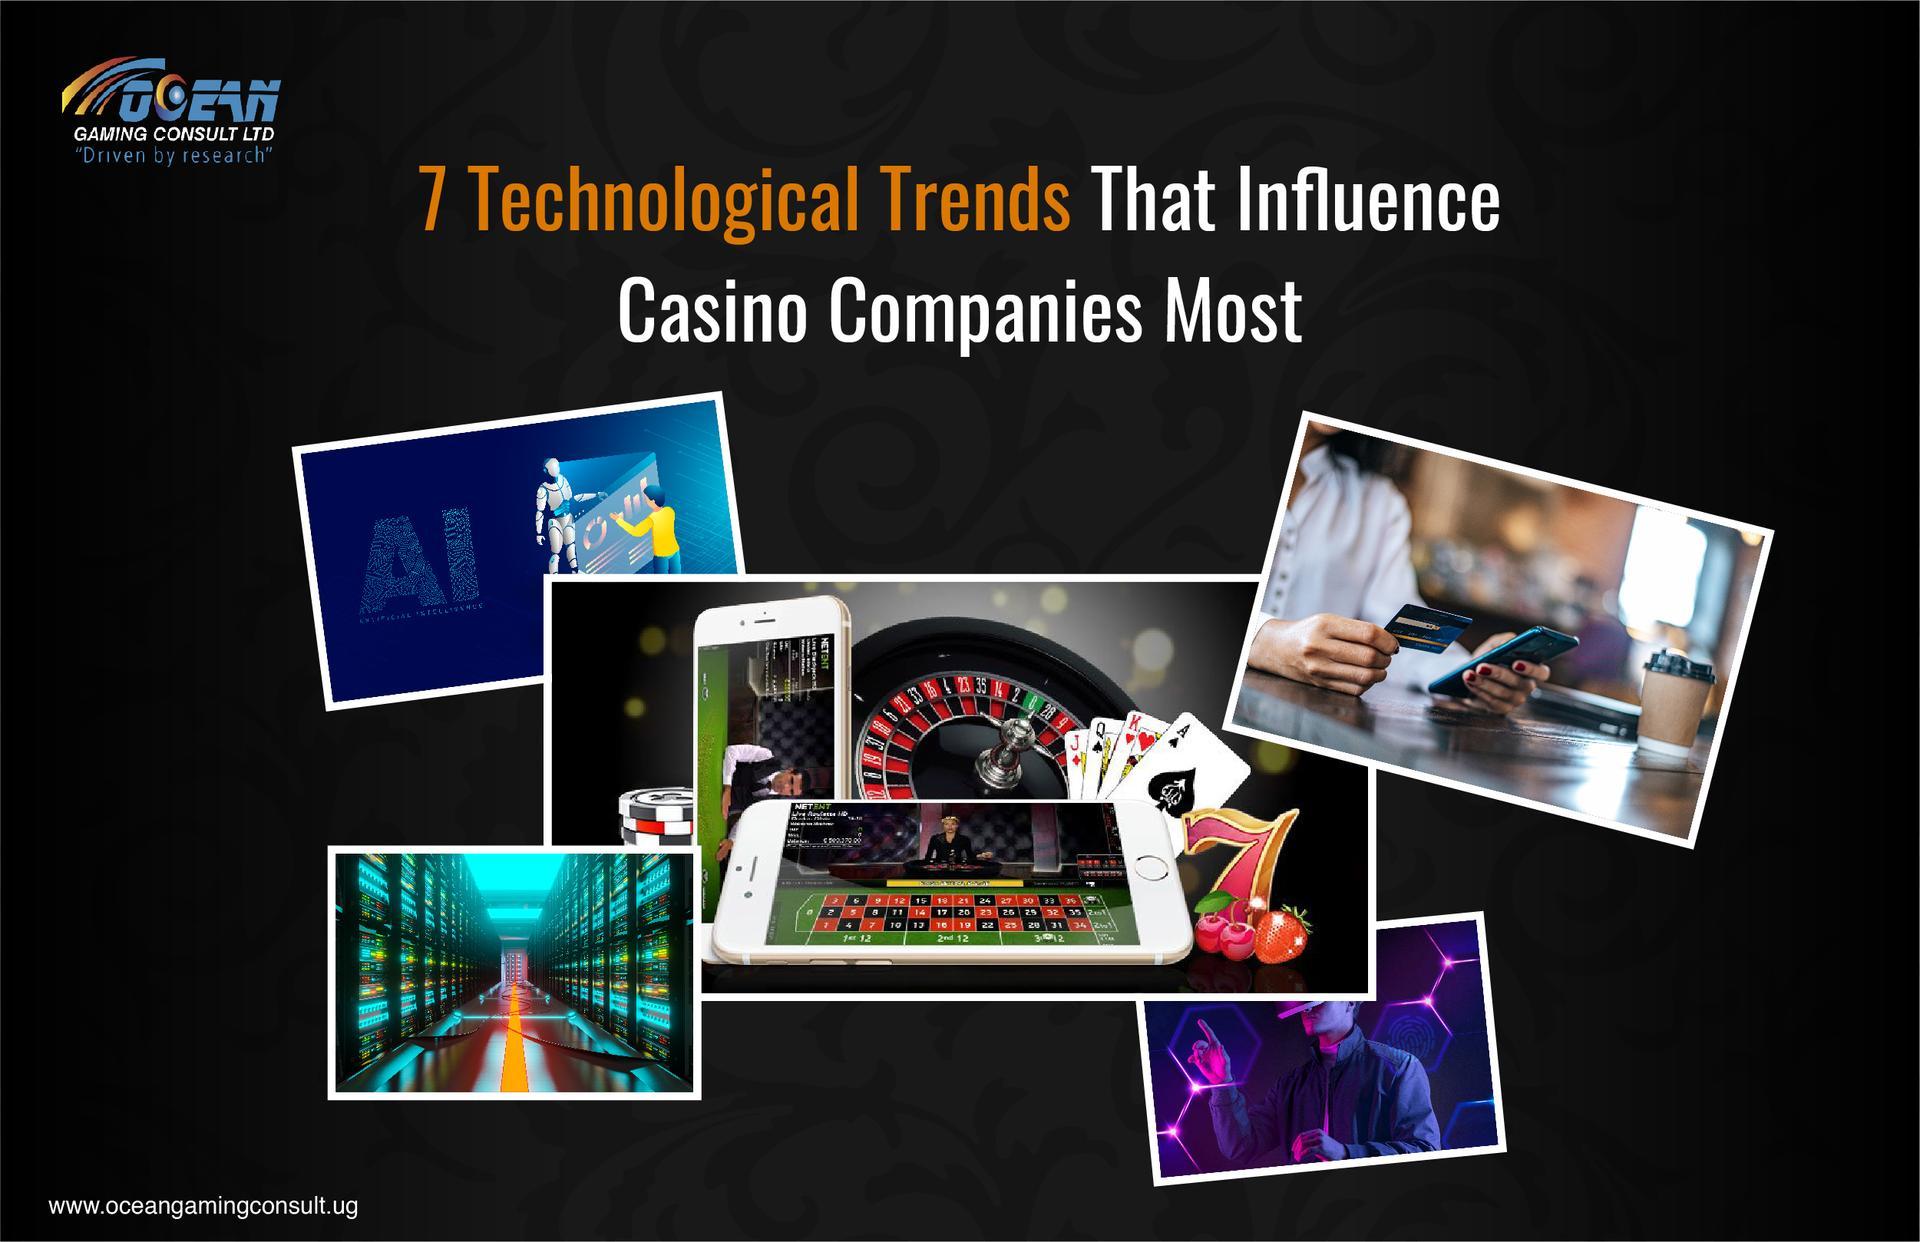 7 Technological Trends That Influence Casino Companies Most